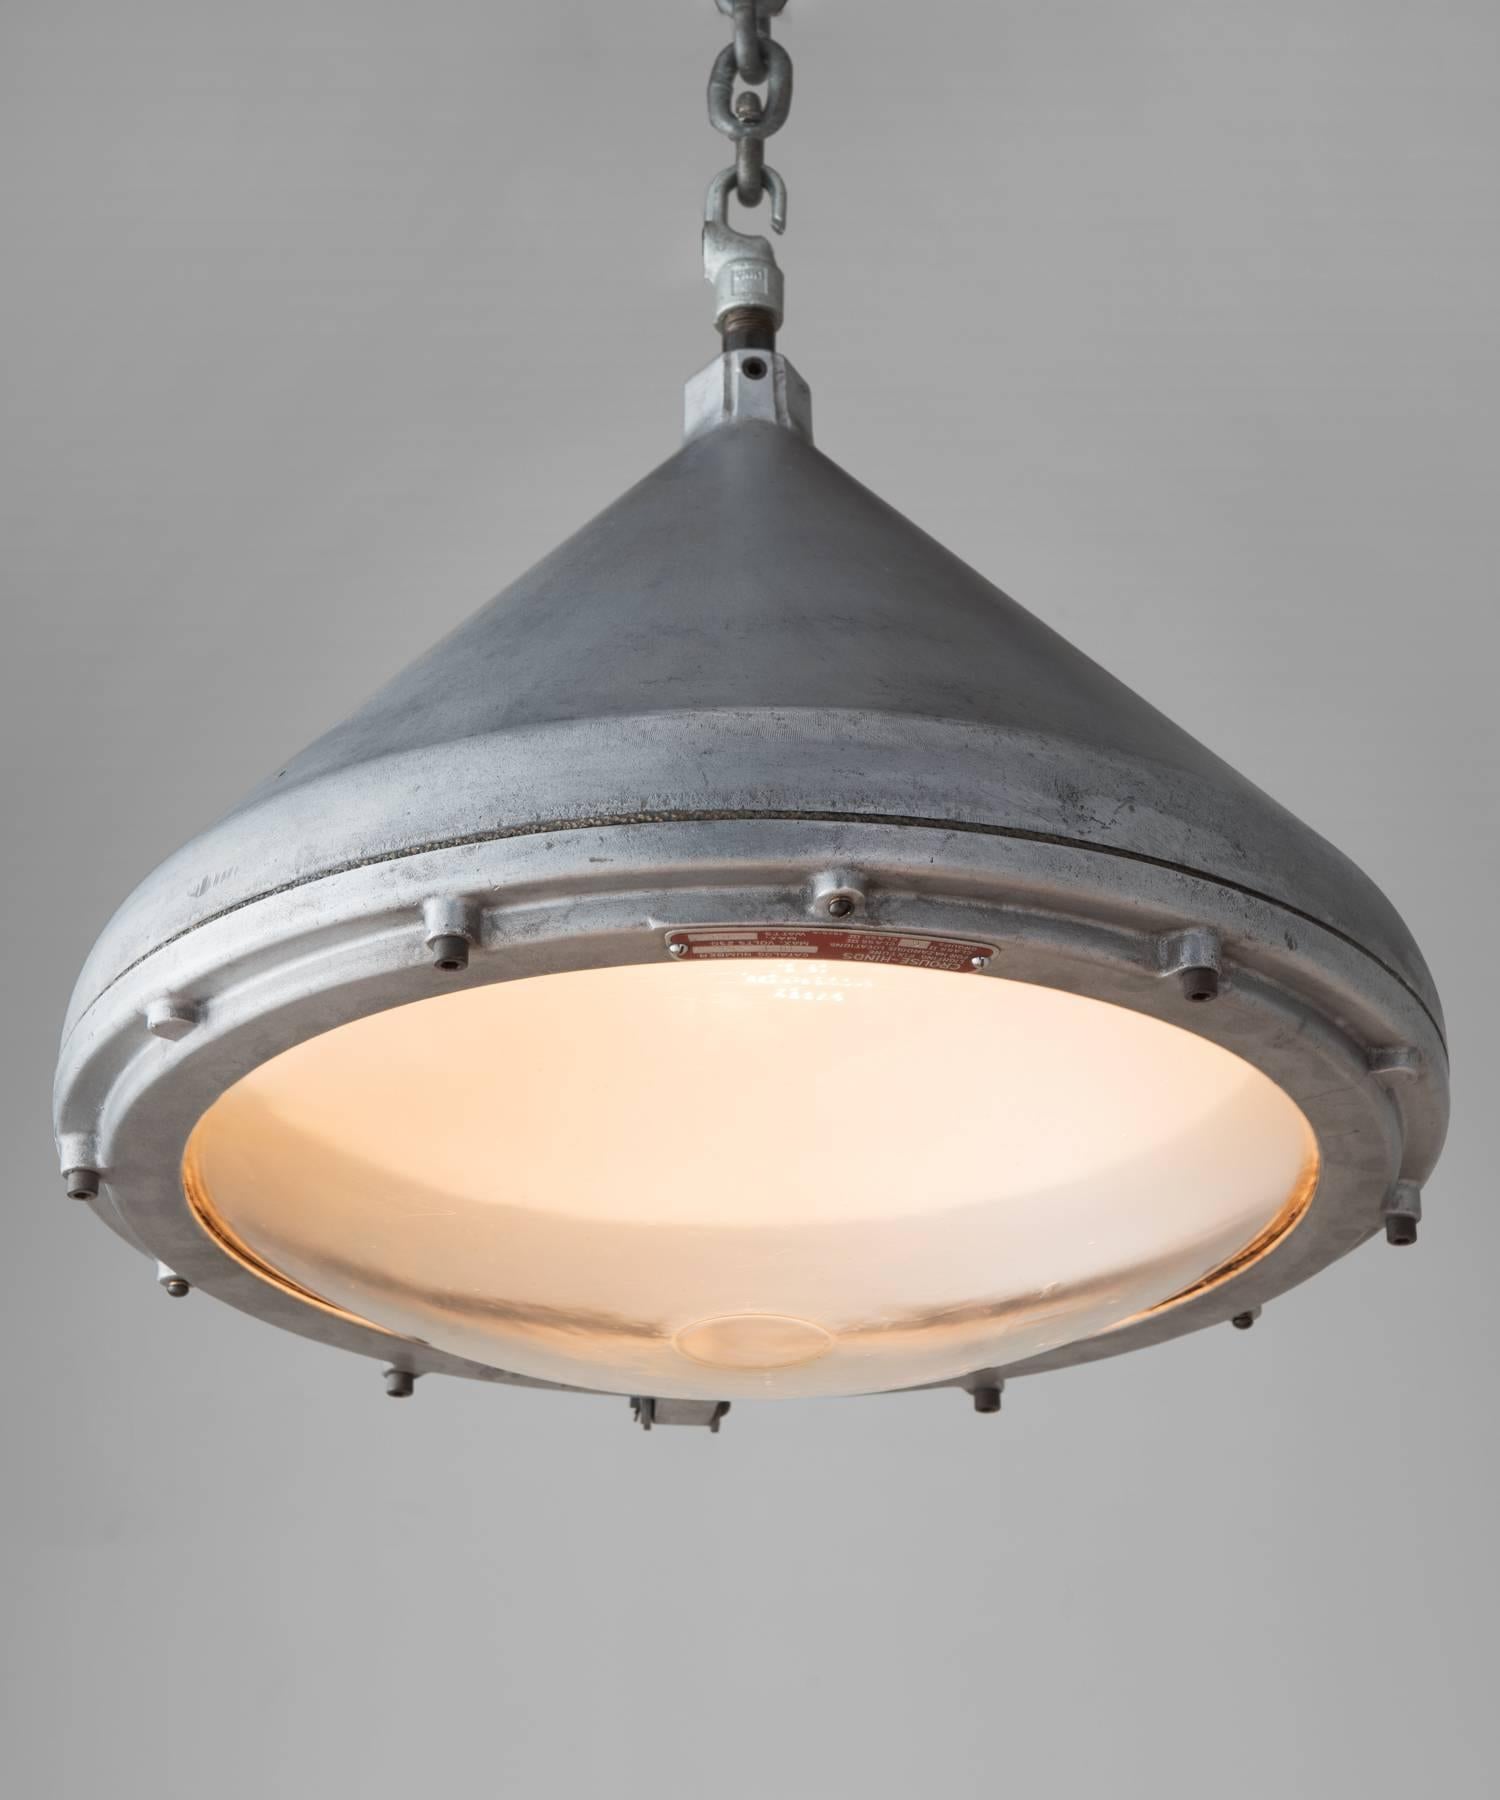 Crouse-Hinds aluminium pendant, America, circa 1950

Generous, industrial form with luminous Pyrex lens hinged to aluminum fitter. Includes manufacturer's seal.

Measures: 17.5